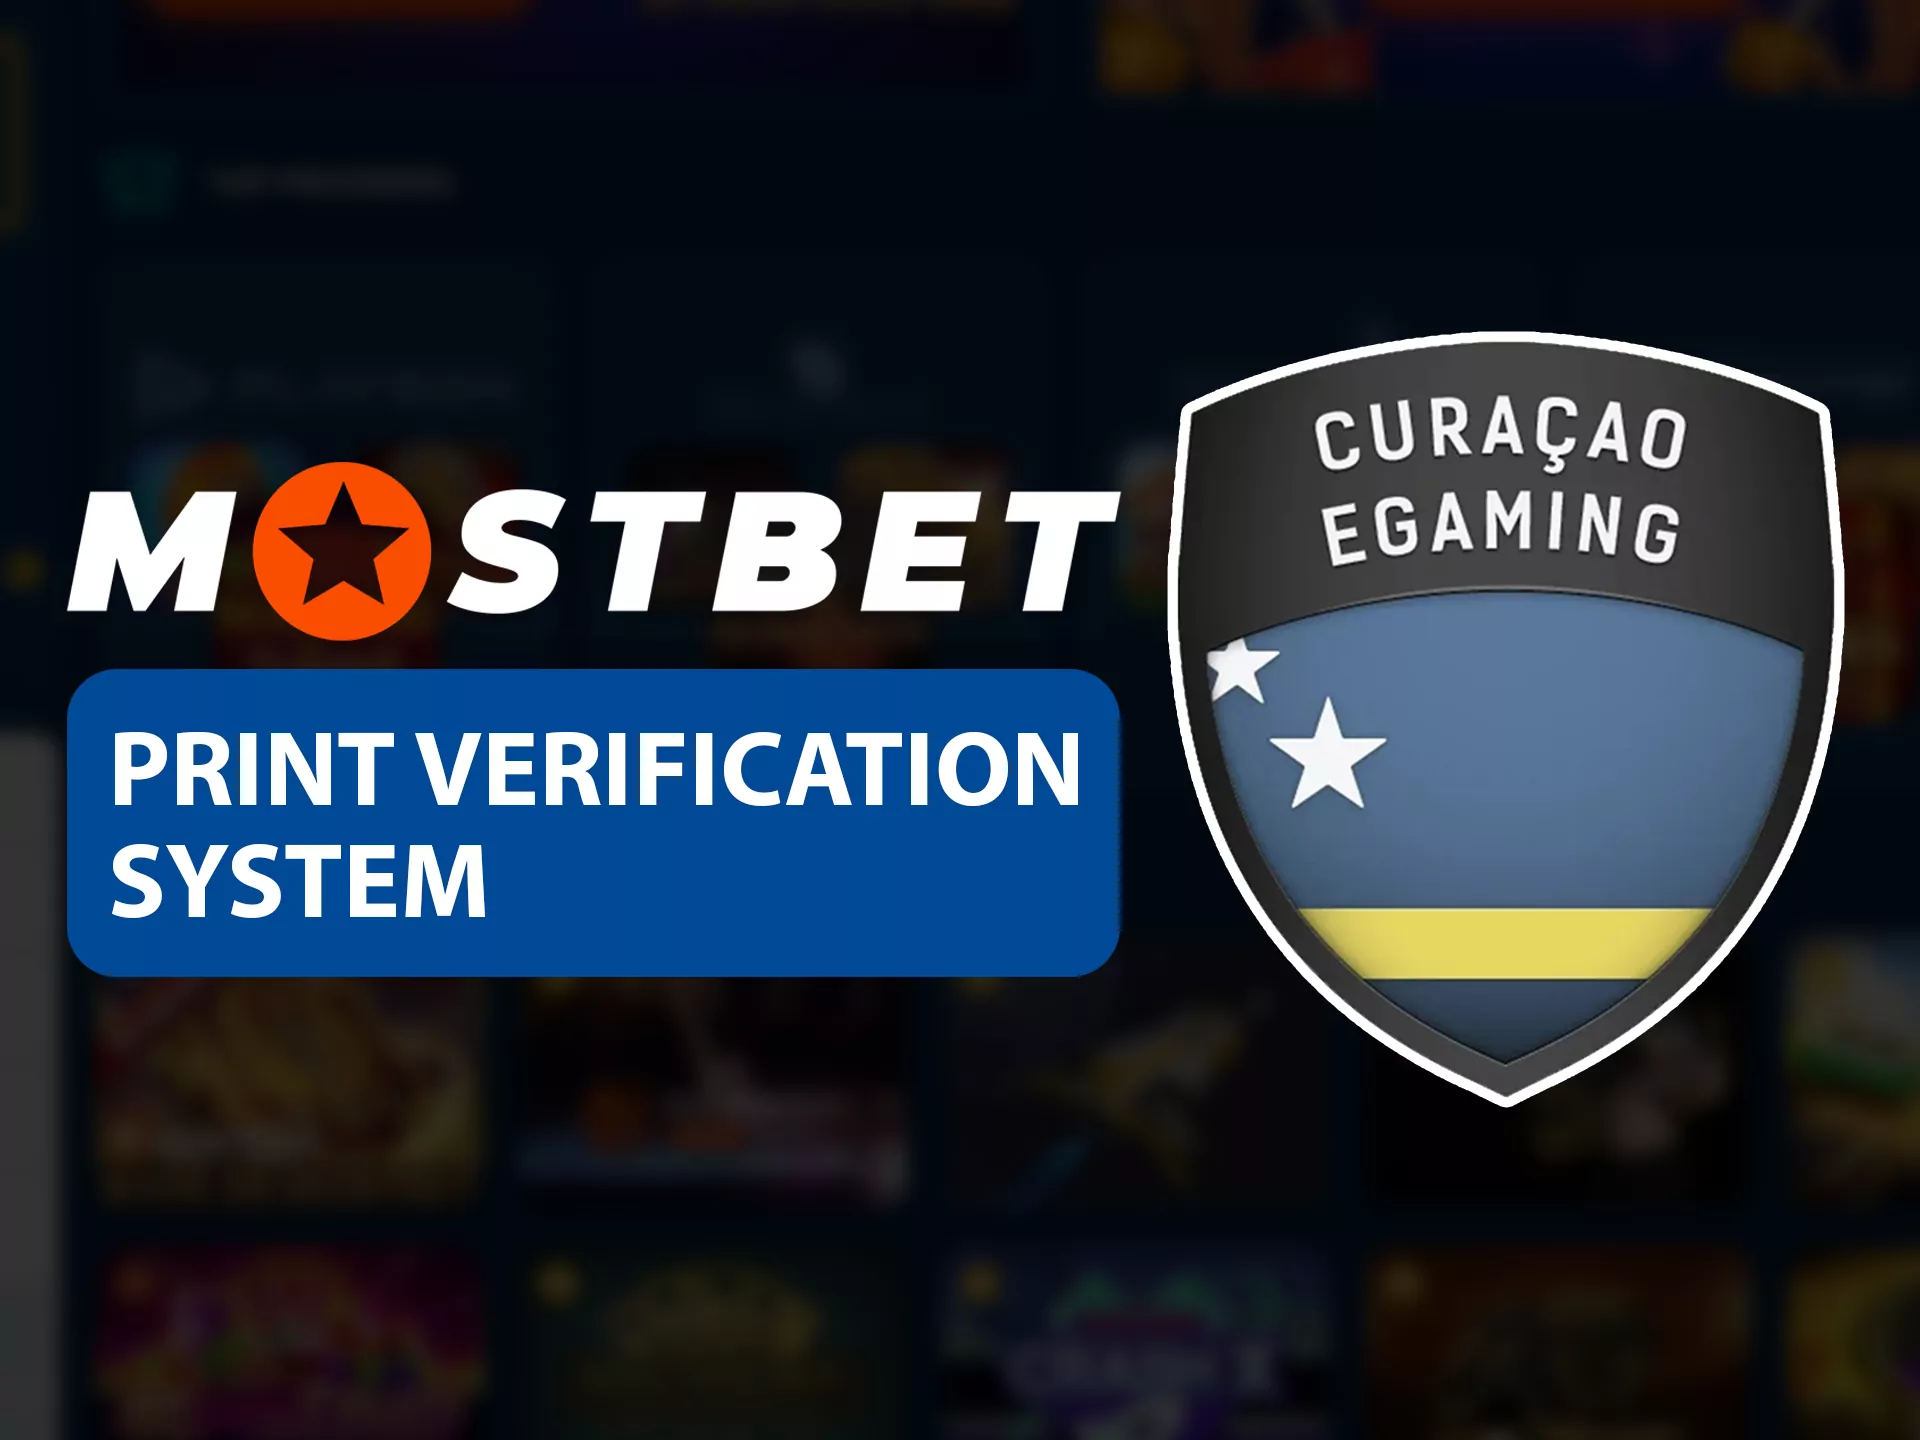 Mostbet has a stable print verification system.